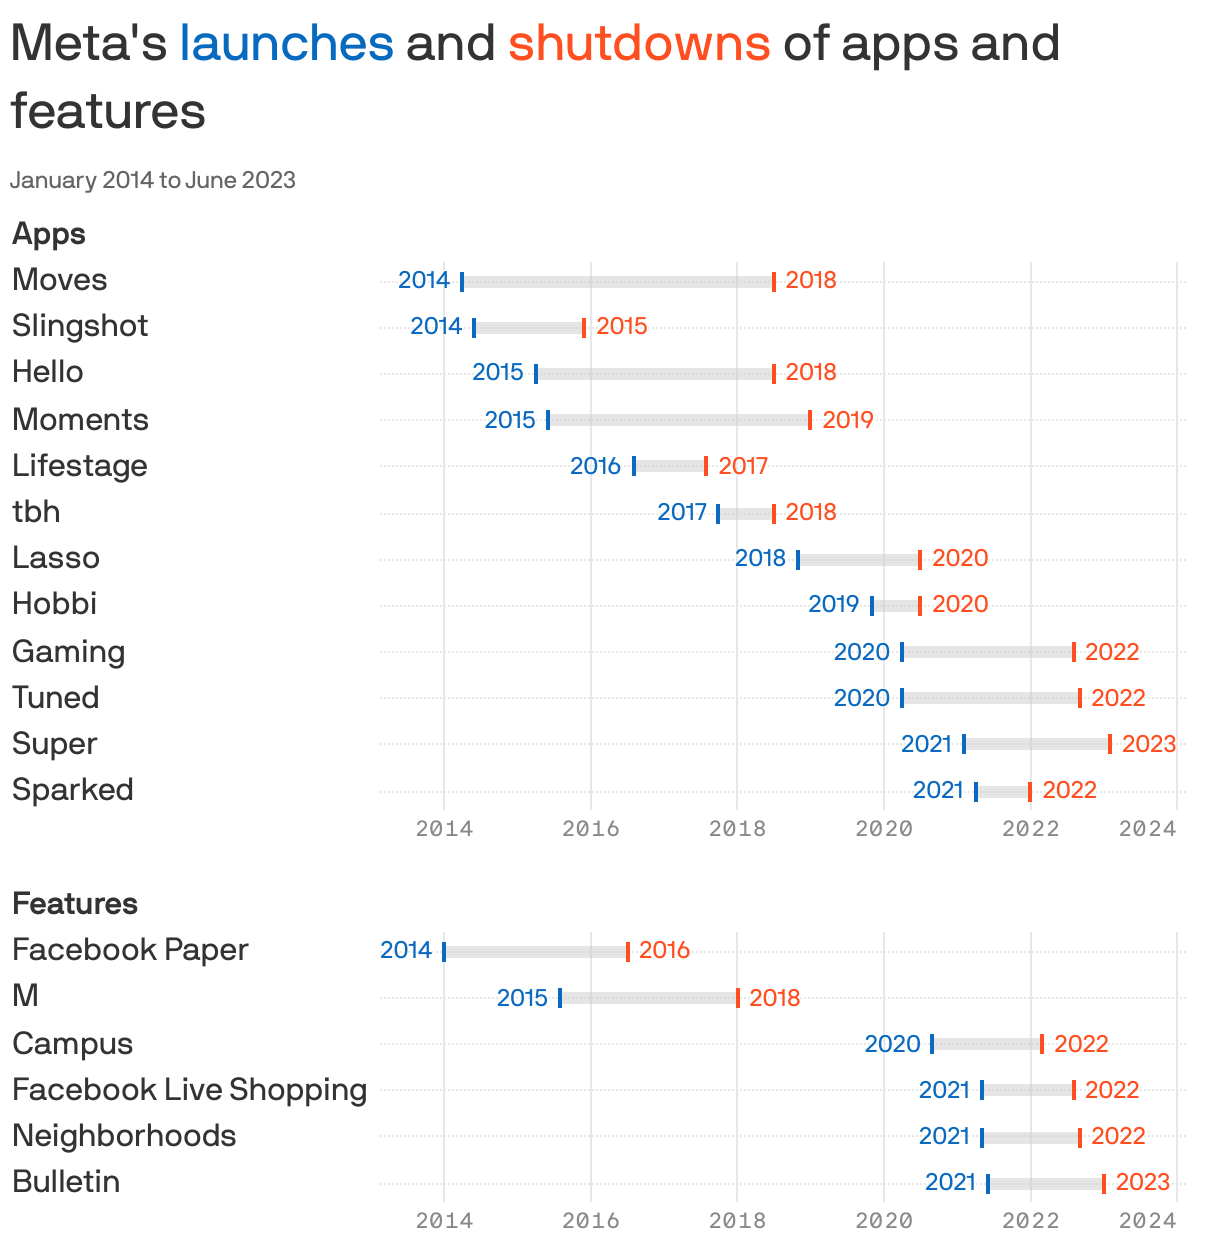 Meta's <span style="color: #086ABF">launches</span> and <span style="color: #FF4E1F">shutdowns</span> of apps and features